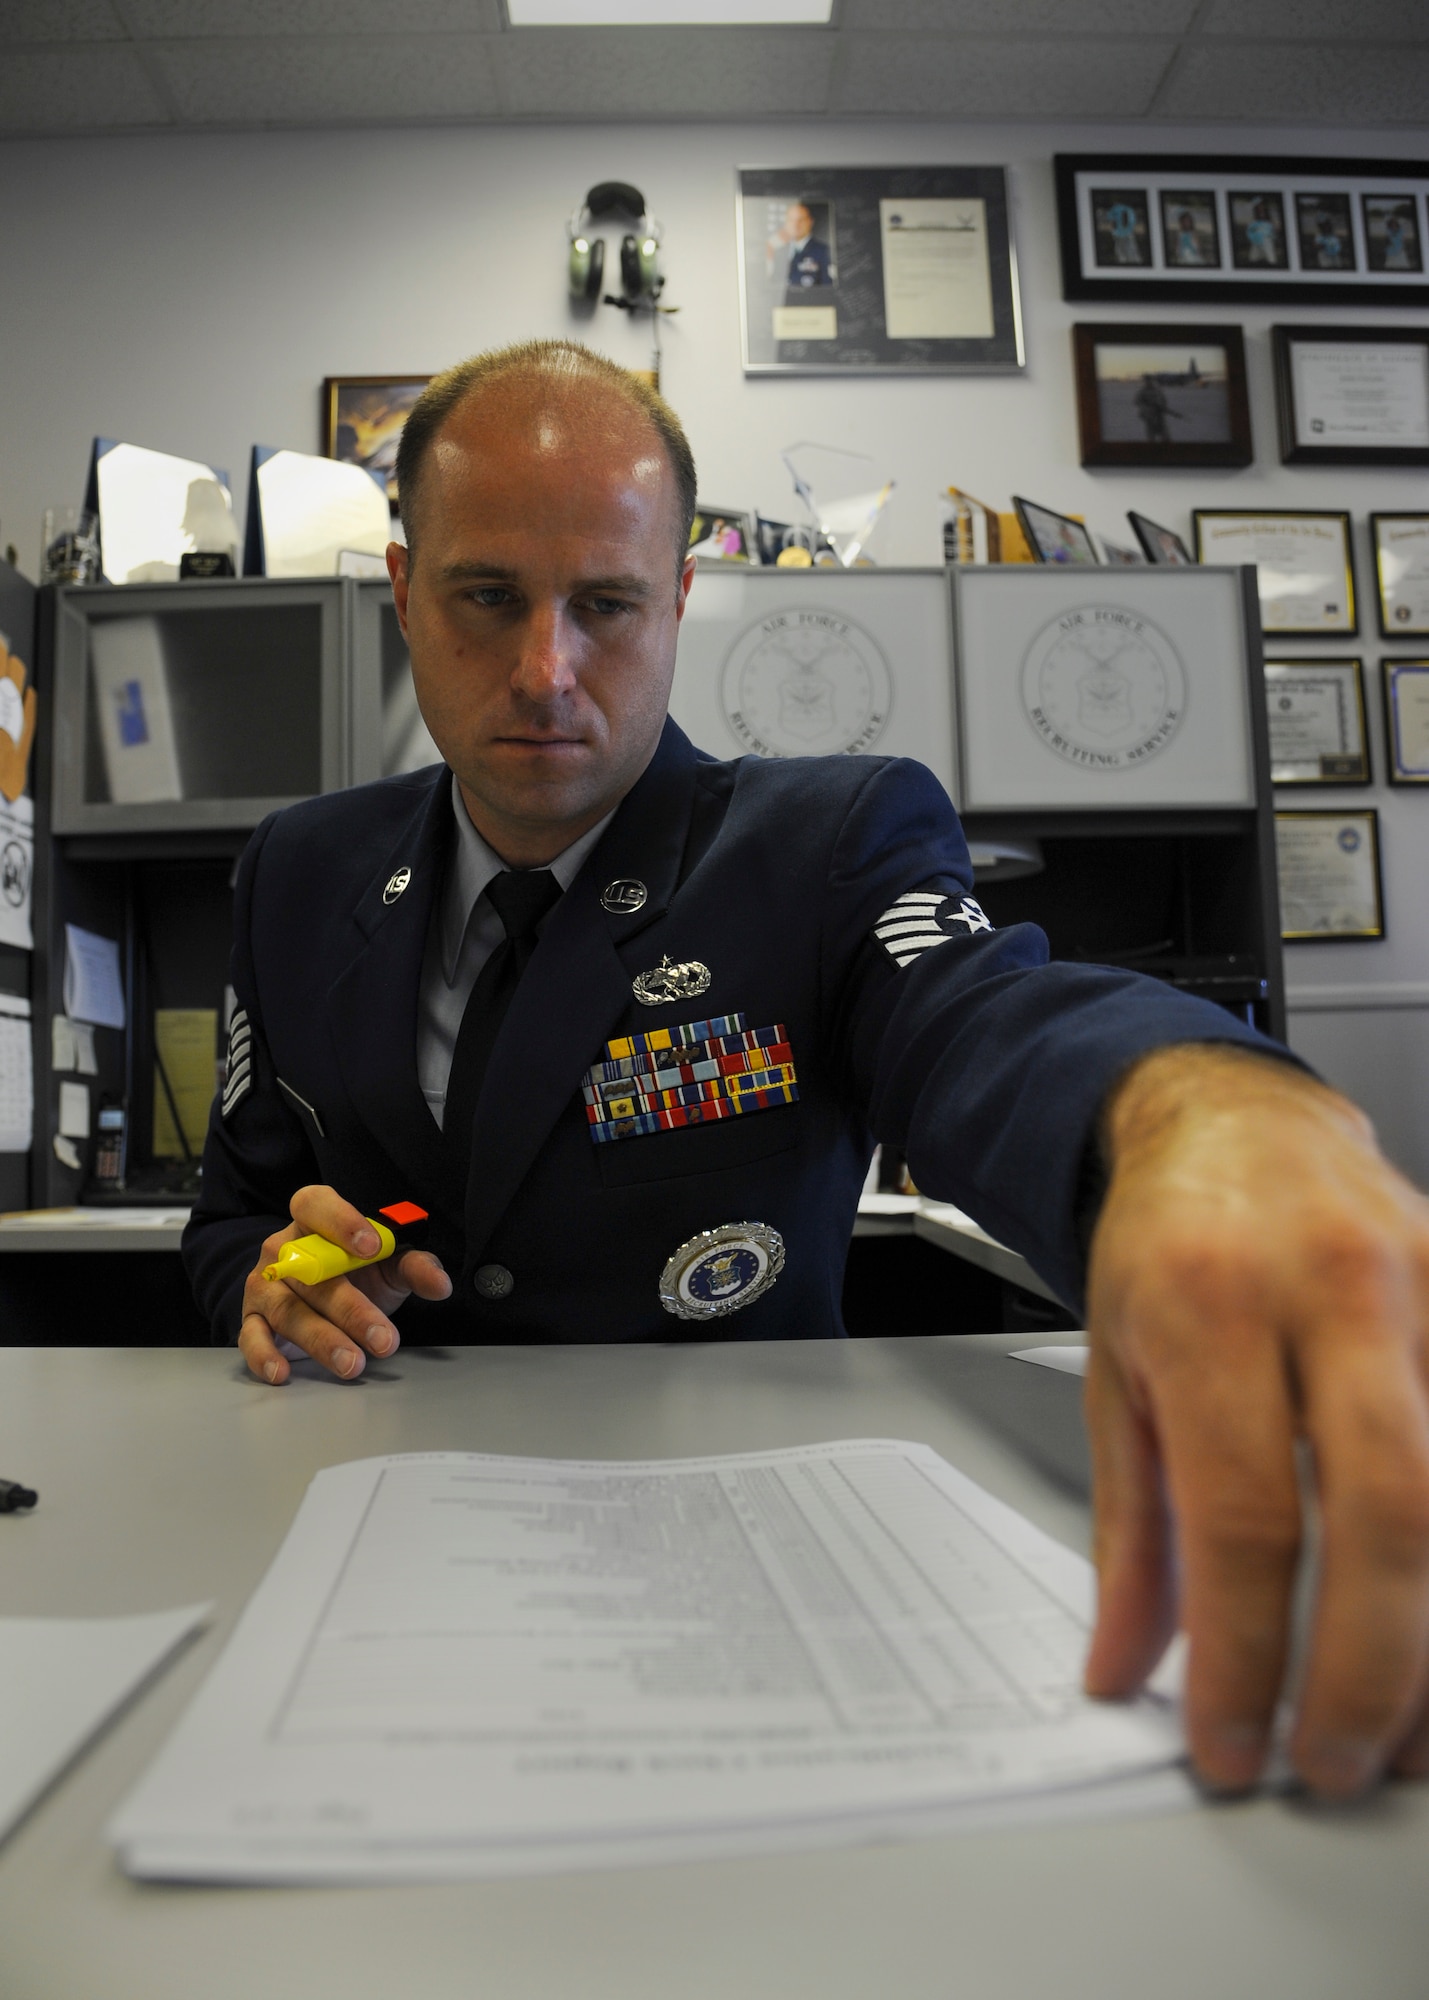 Tech. Sgt. John Vaughn, a 345th Recruiting Squadron enlisted accessions recruiter, begins the process of filling out paperwork for a potential Air Force recruit July 15, 2014, in Jacksonville, Ark. Enlisting in the Air Force can often be a tedious process, but recruiters work to ensure that motivated young men and women are able to pursue their goal of becoming Airmen. (U.S. Air Force photo by Airman 1st Class Harry Brexel)